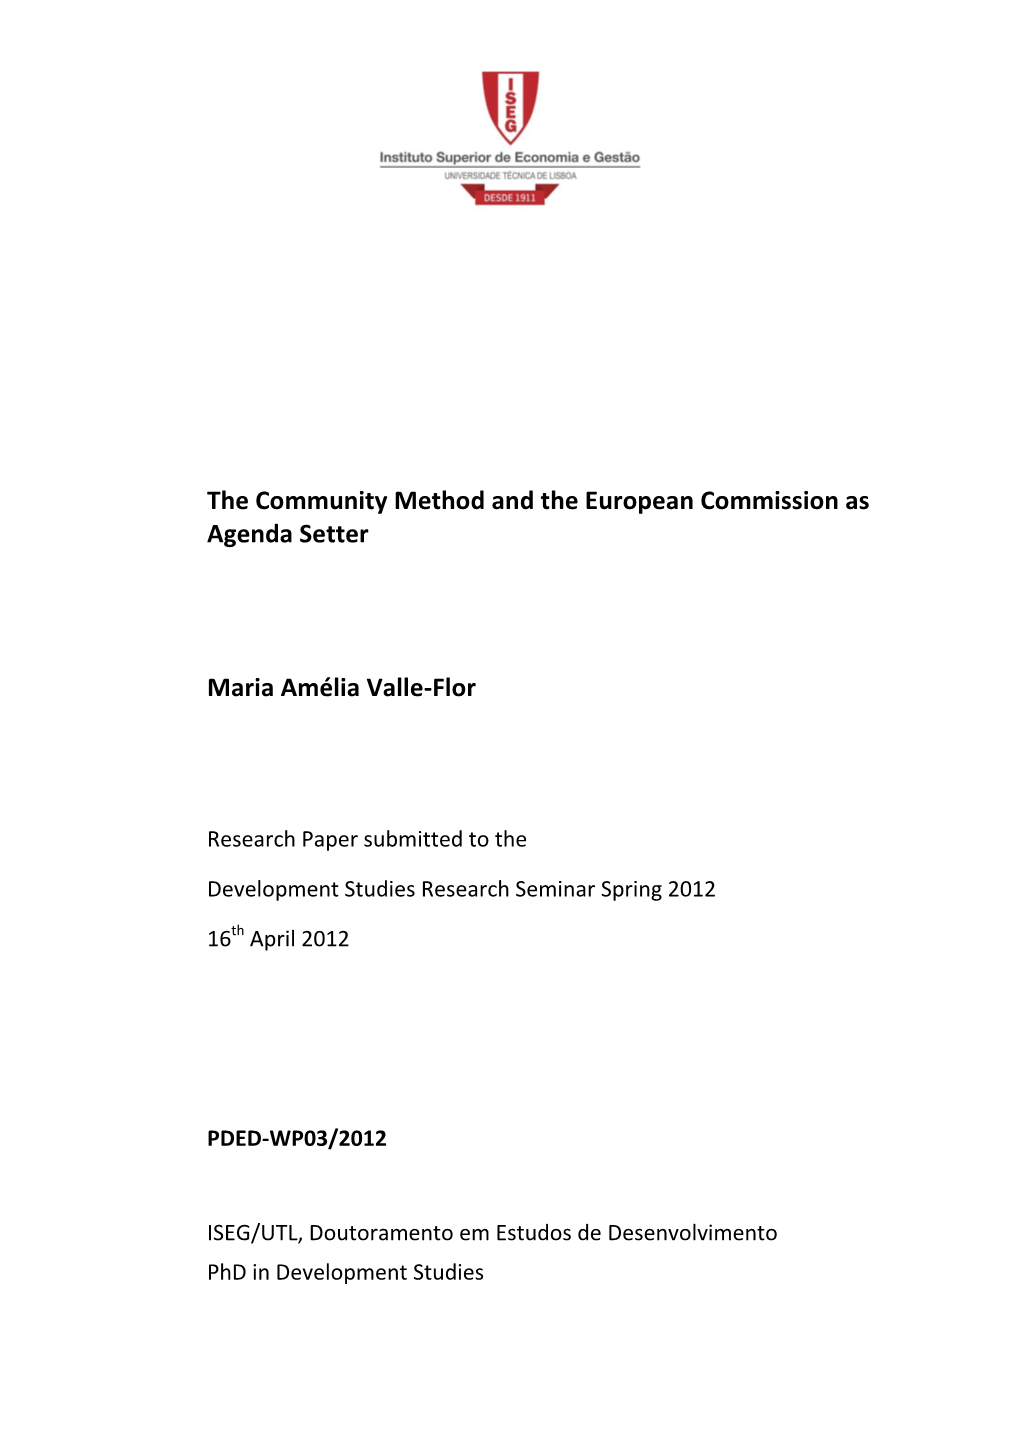 The Community Method and the European Commission As Agenda Setter